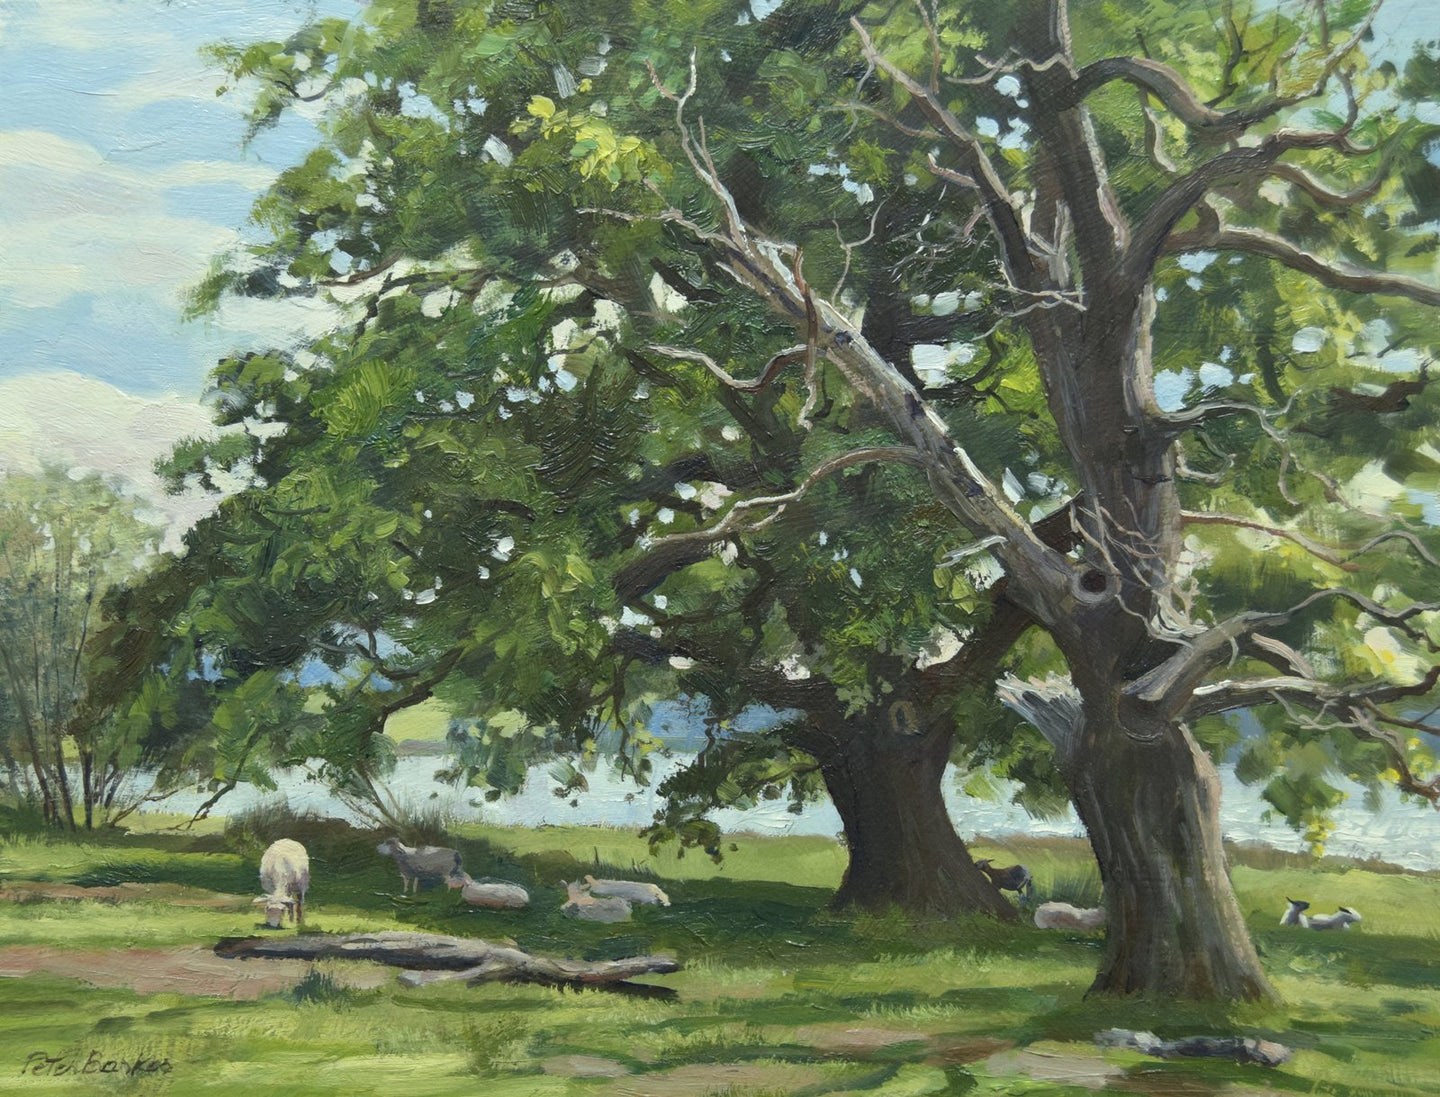 A 9 x 12 inch oil painting of a big, vigorous Oak tree next to an old, dead Oak, close to the shores of Rutland Water at Barnsdale, with a few sheep resting in the shade.